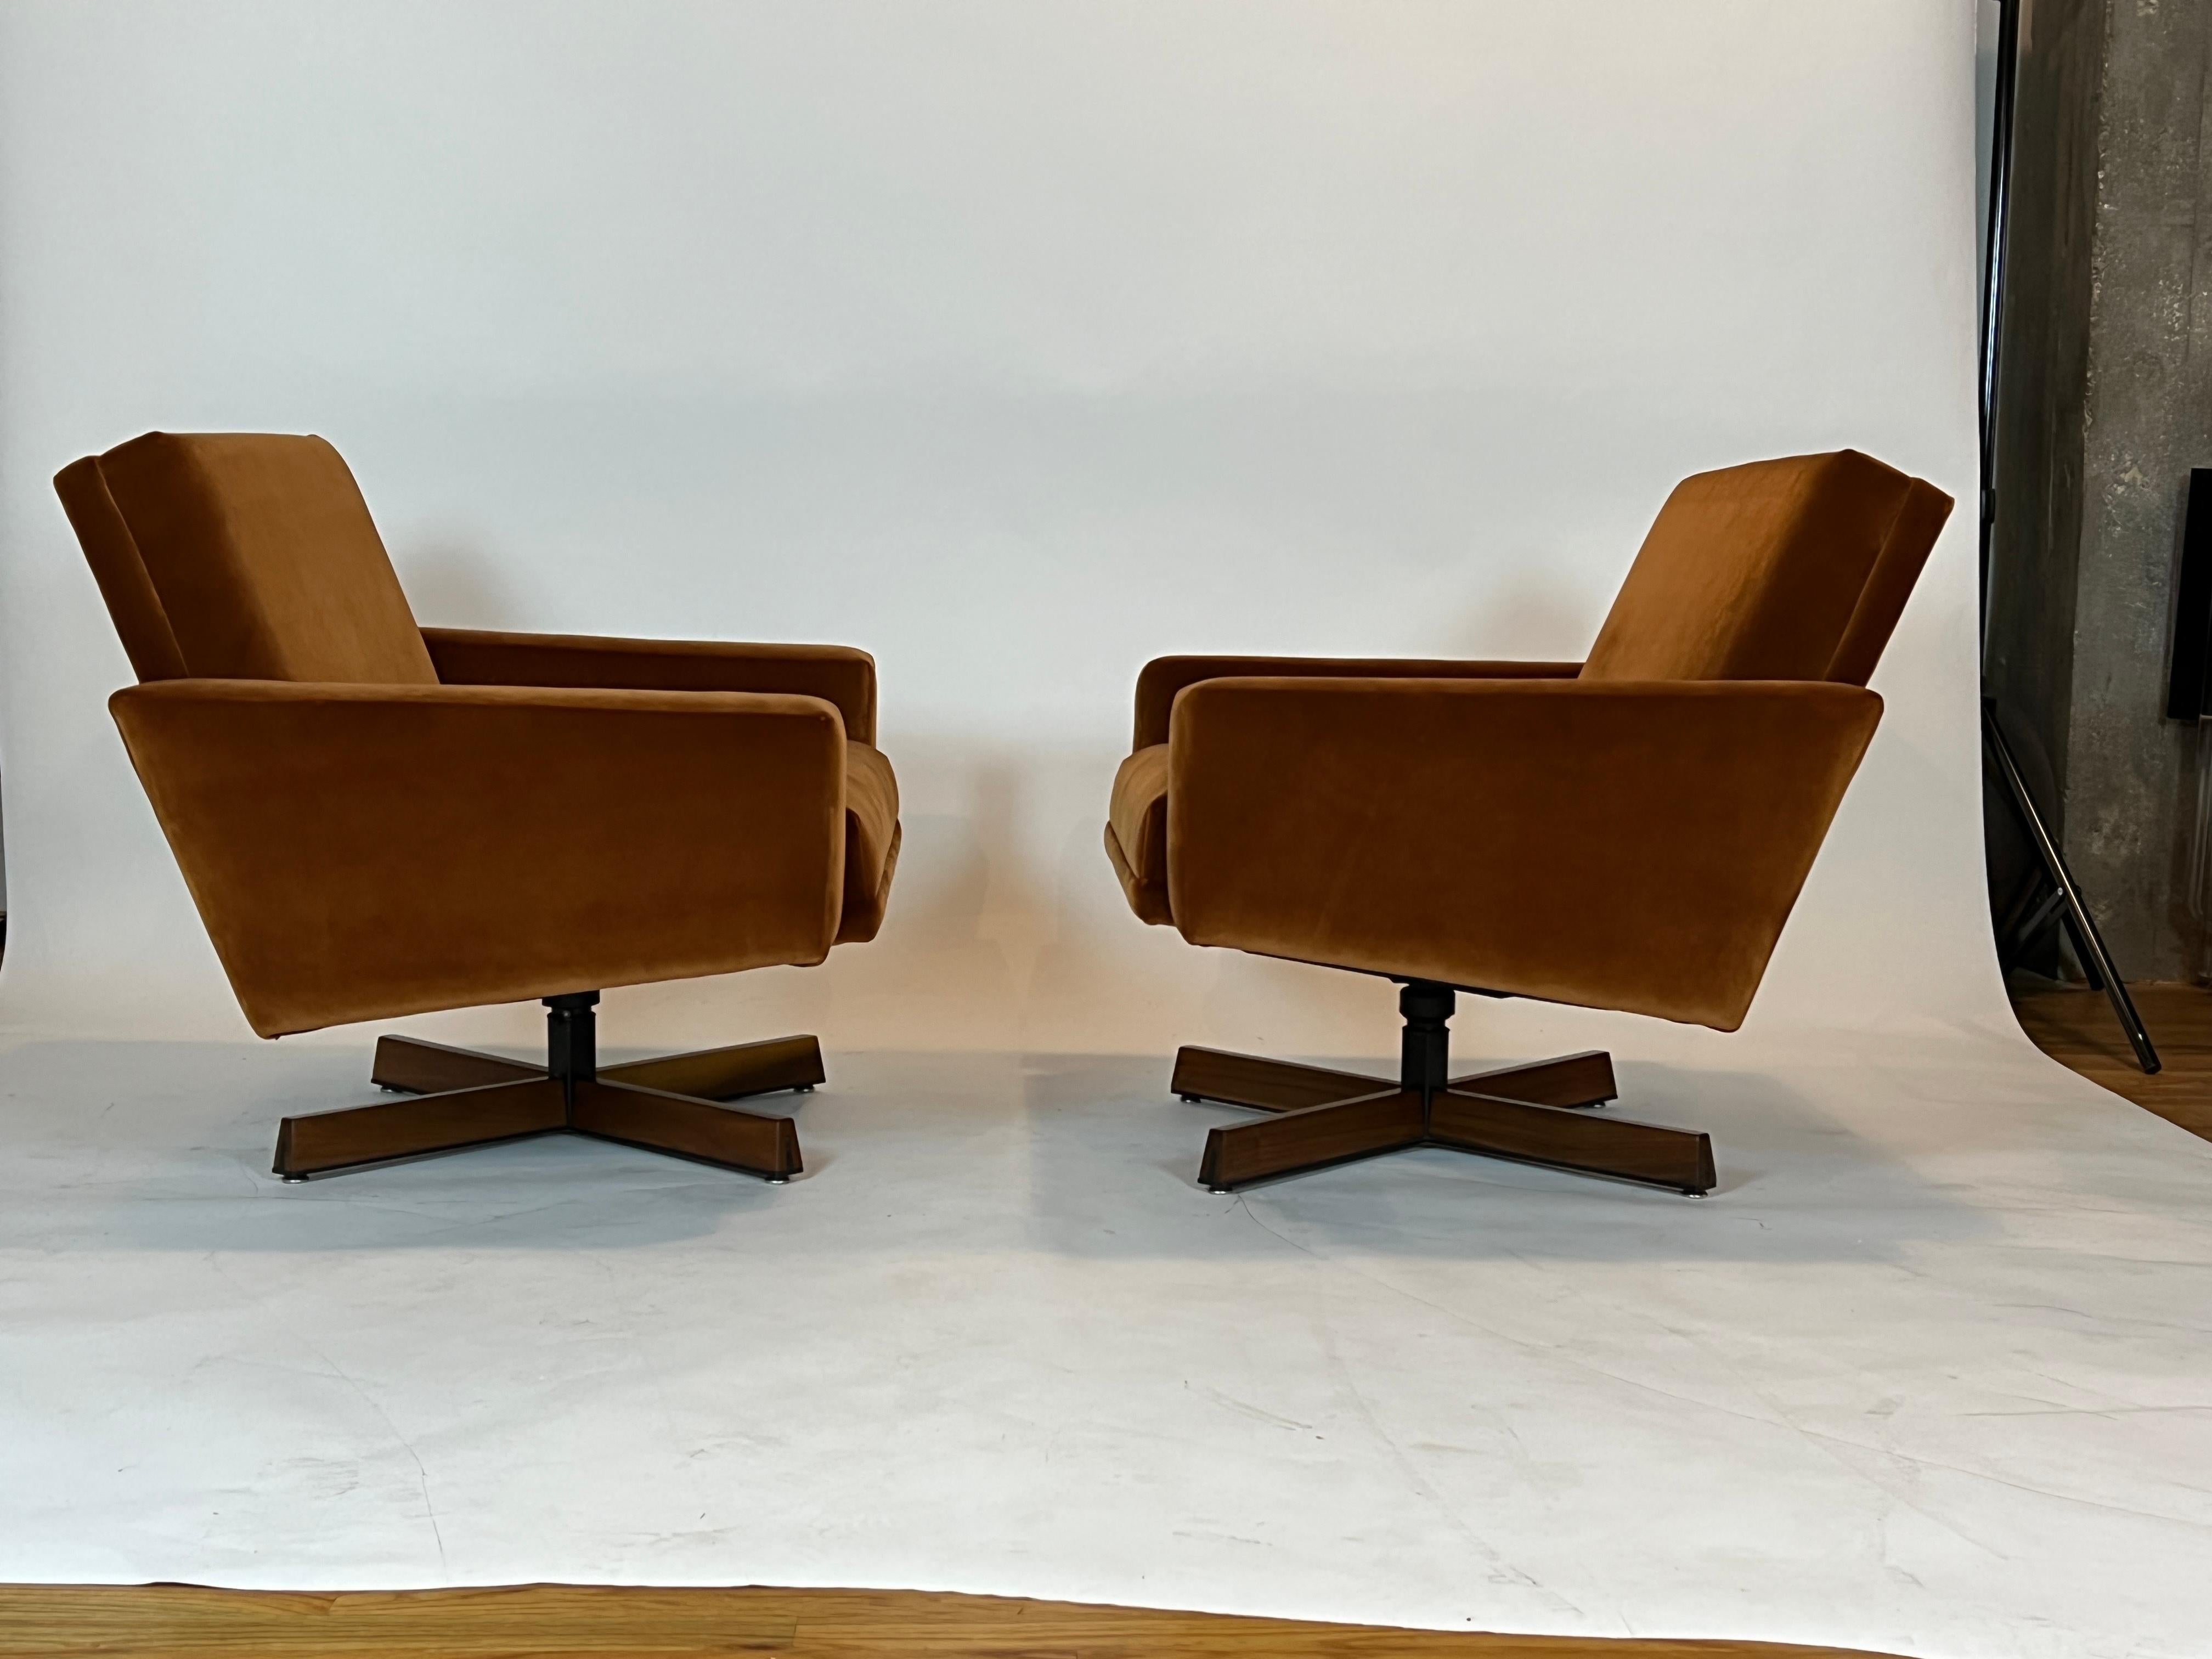 Pair of mid-century modern lounge chairs by John Stuart newly upholstered in a cognac color velvet.